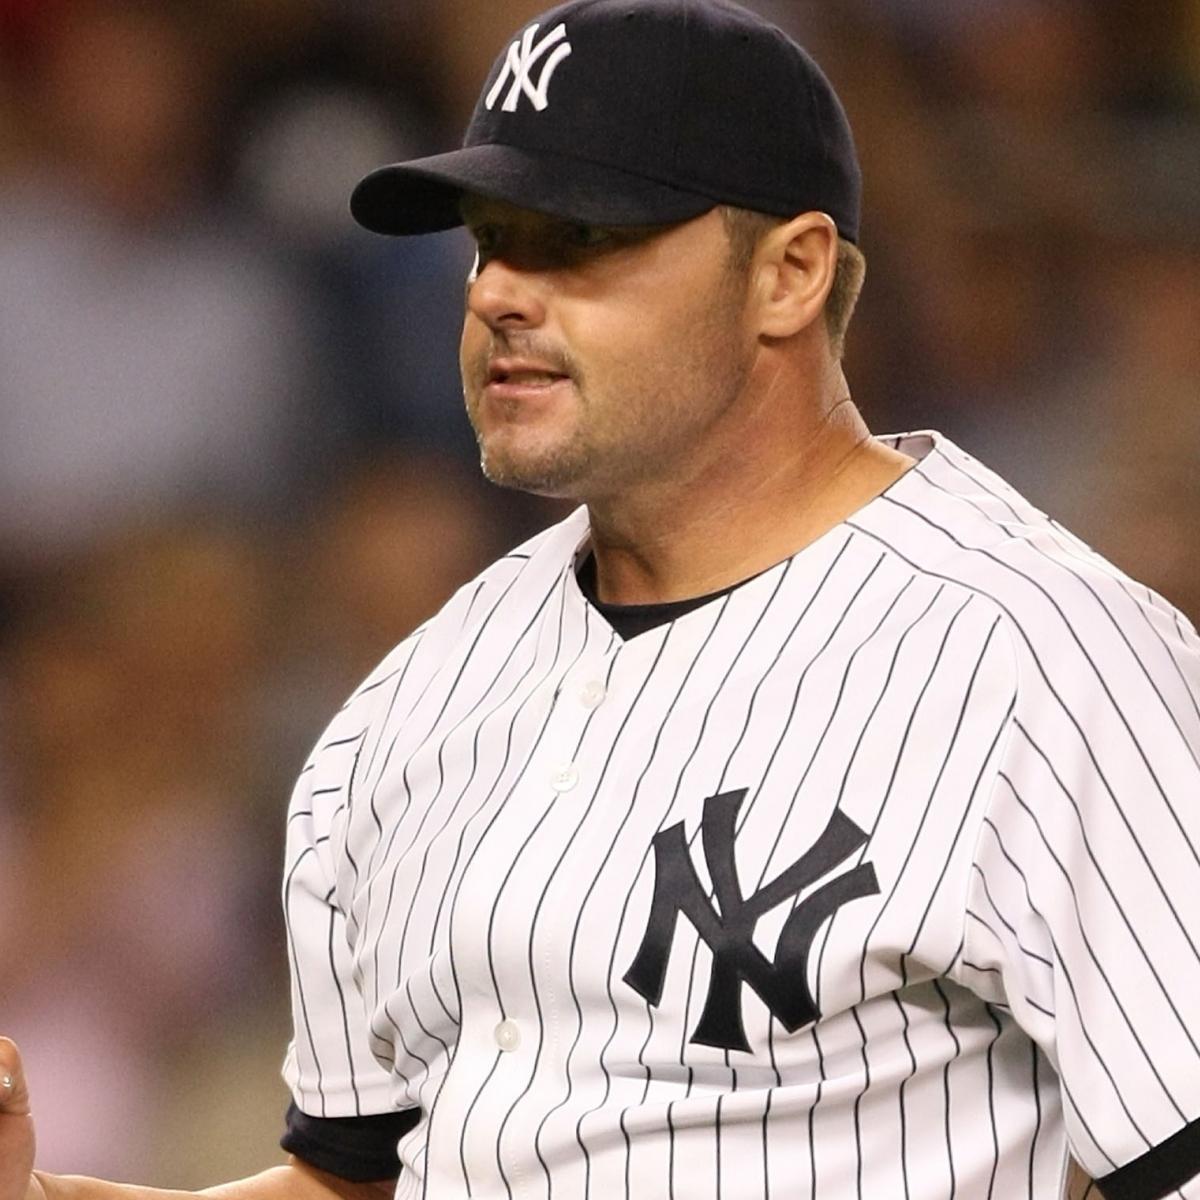 Who would you rather have: Roger Clemens or Pedro Martínez? - The